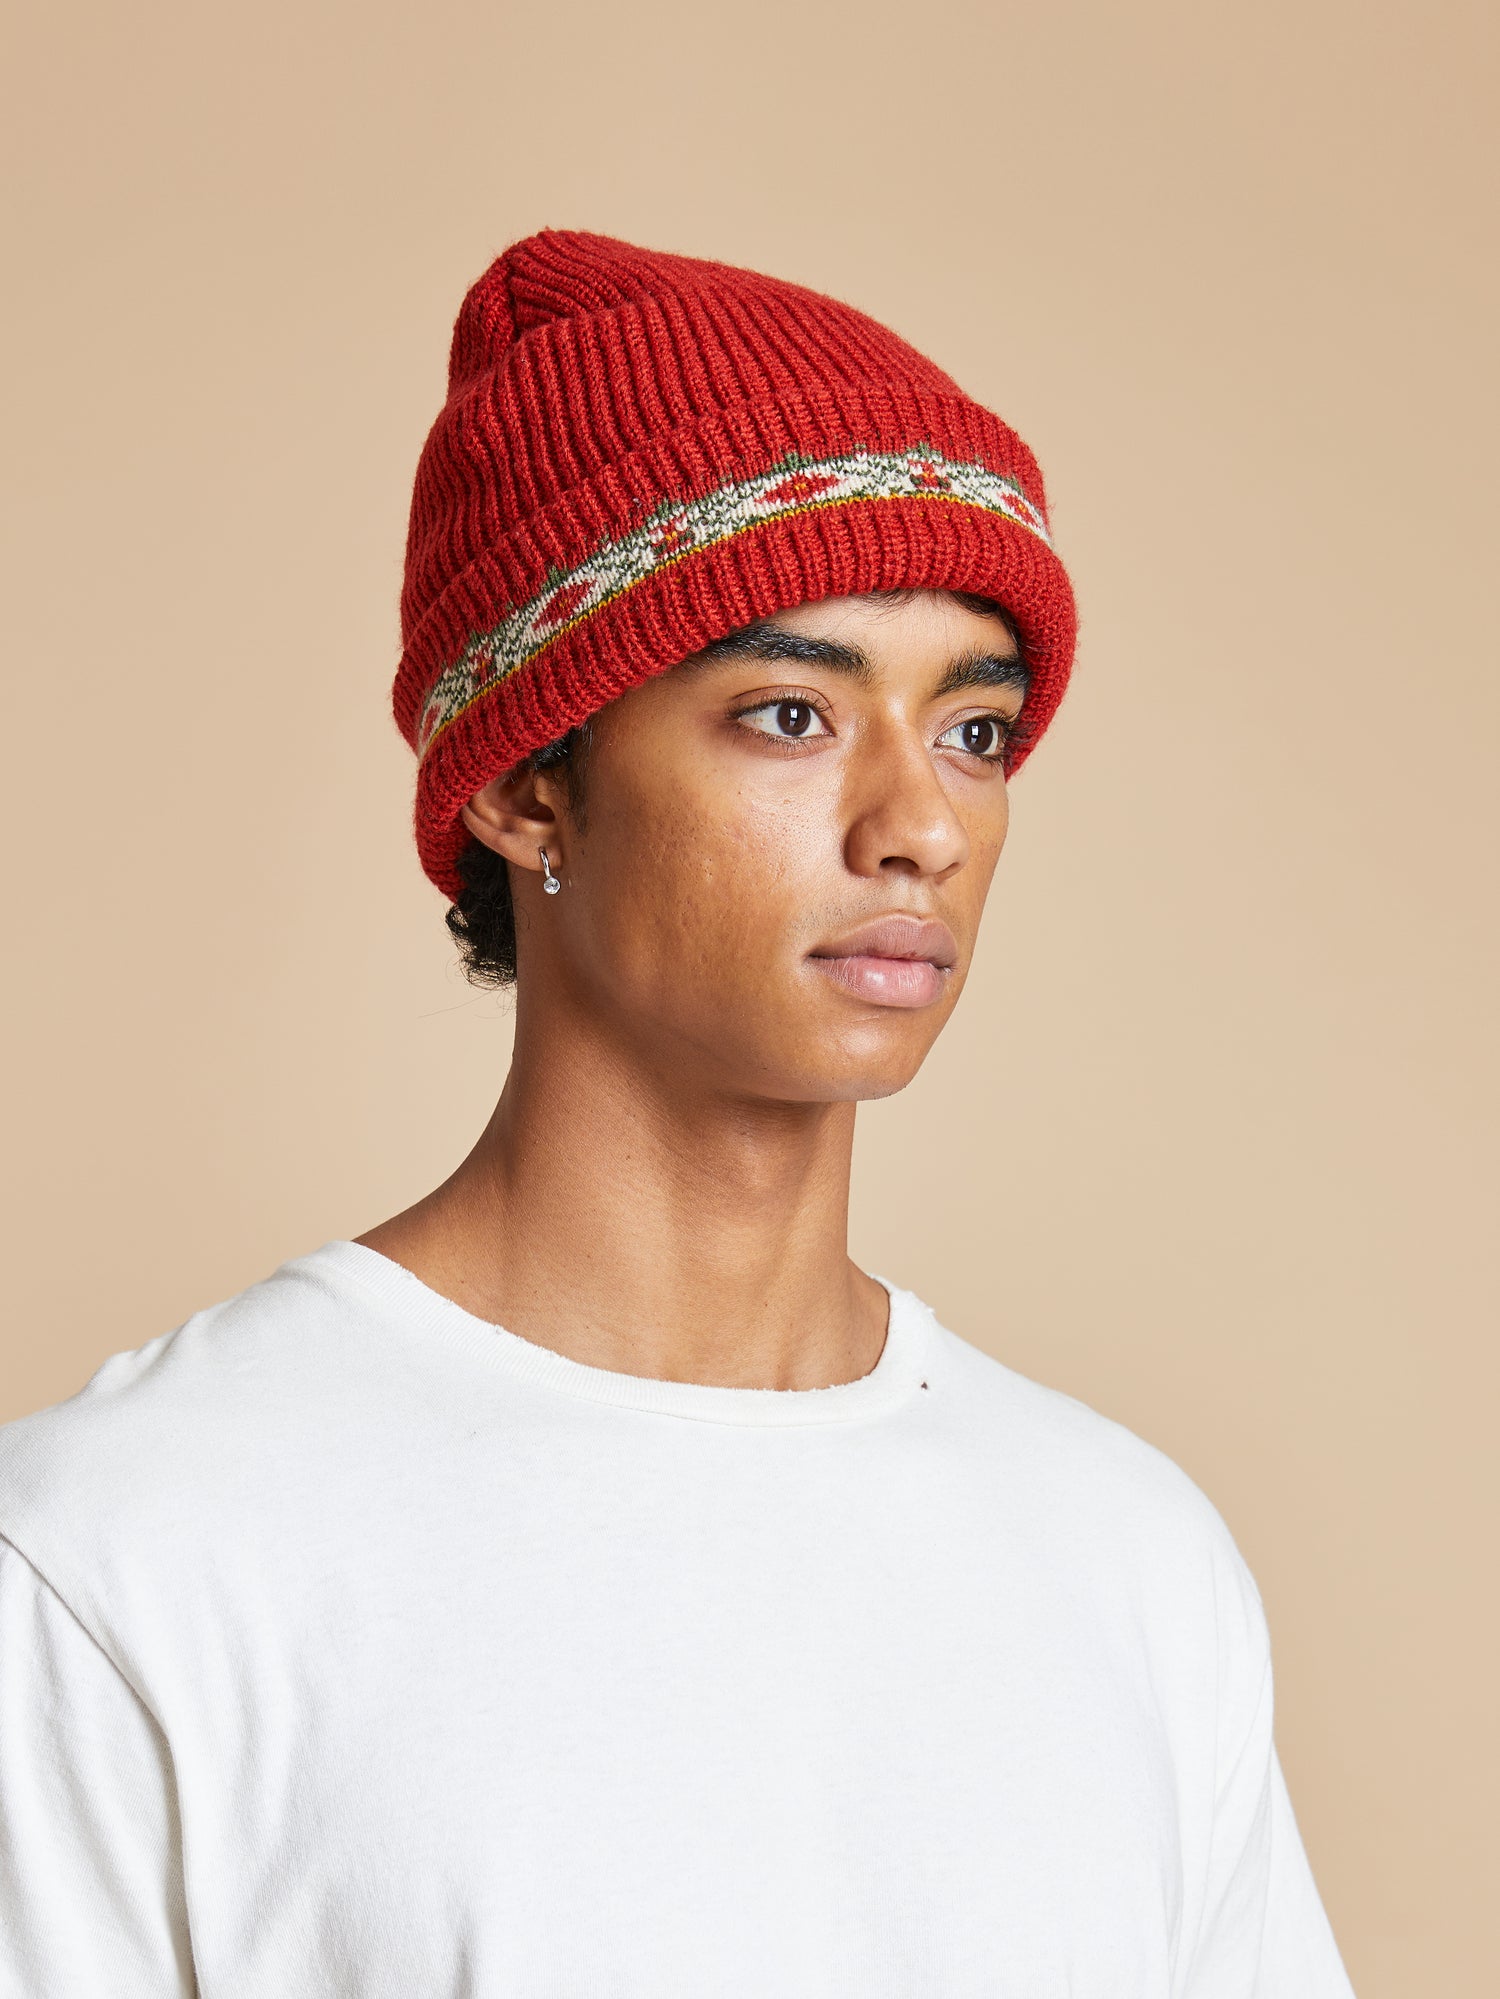 A young man wearing a red Profound Ajrak Beanie.